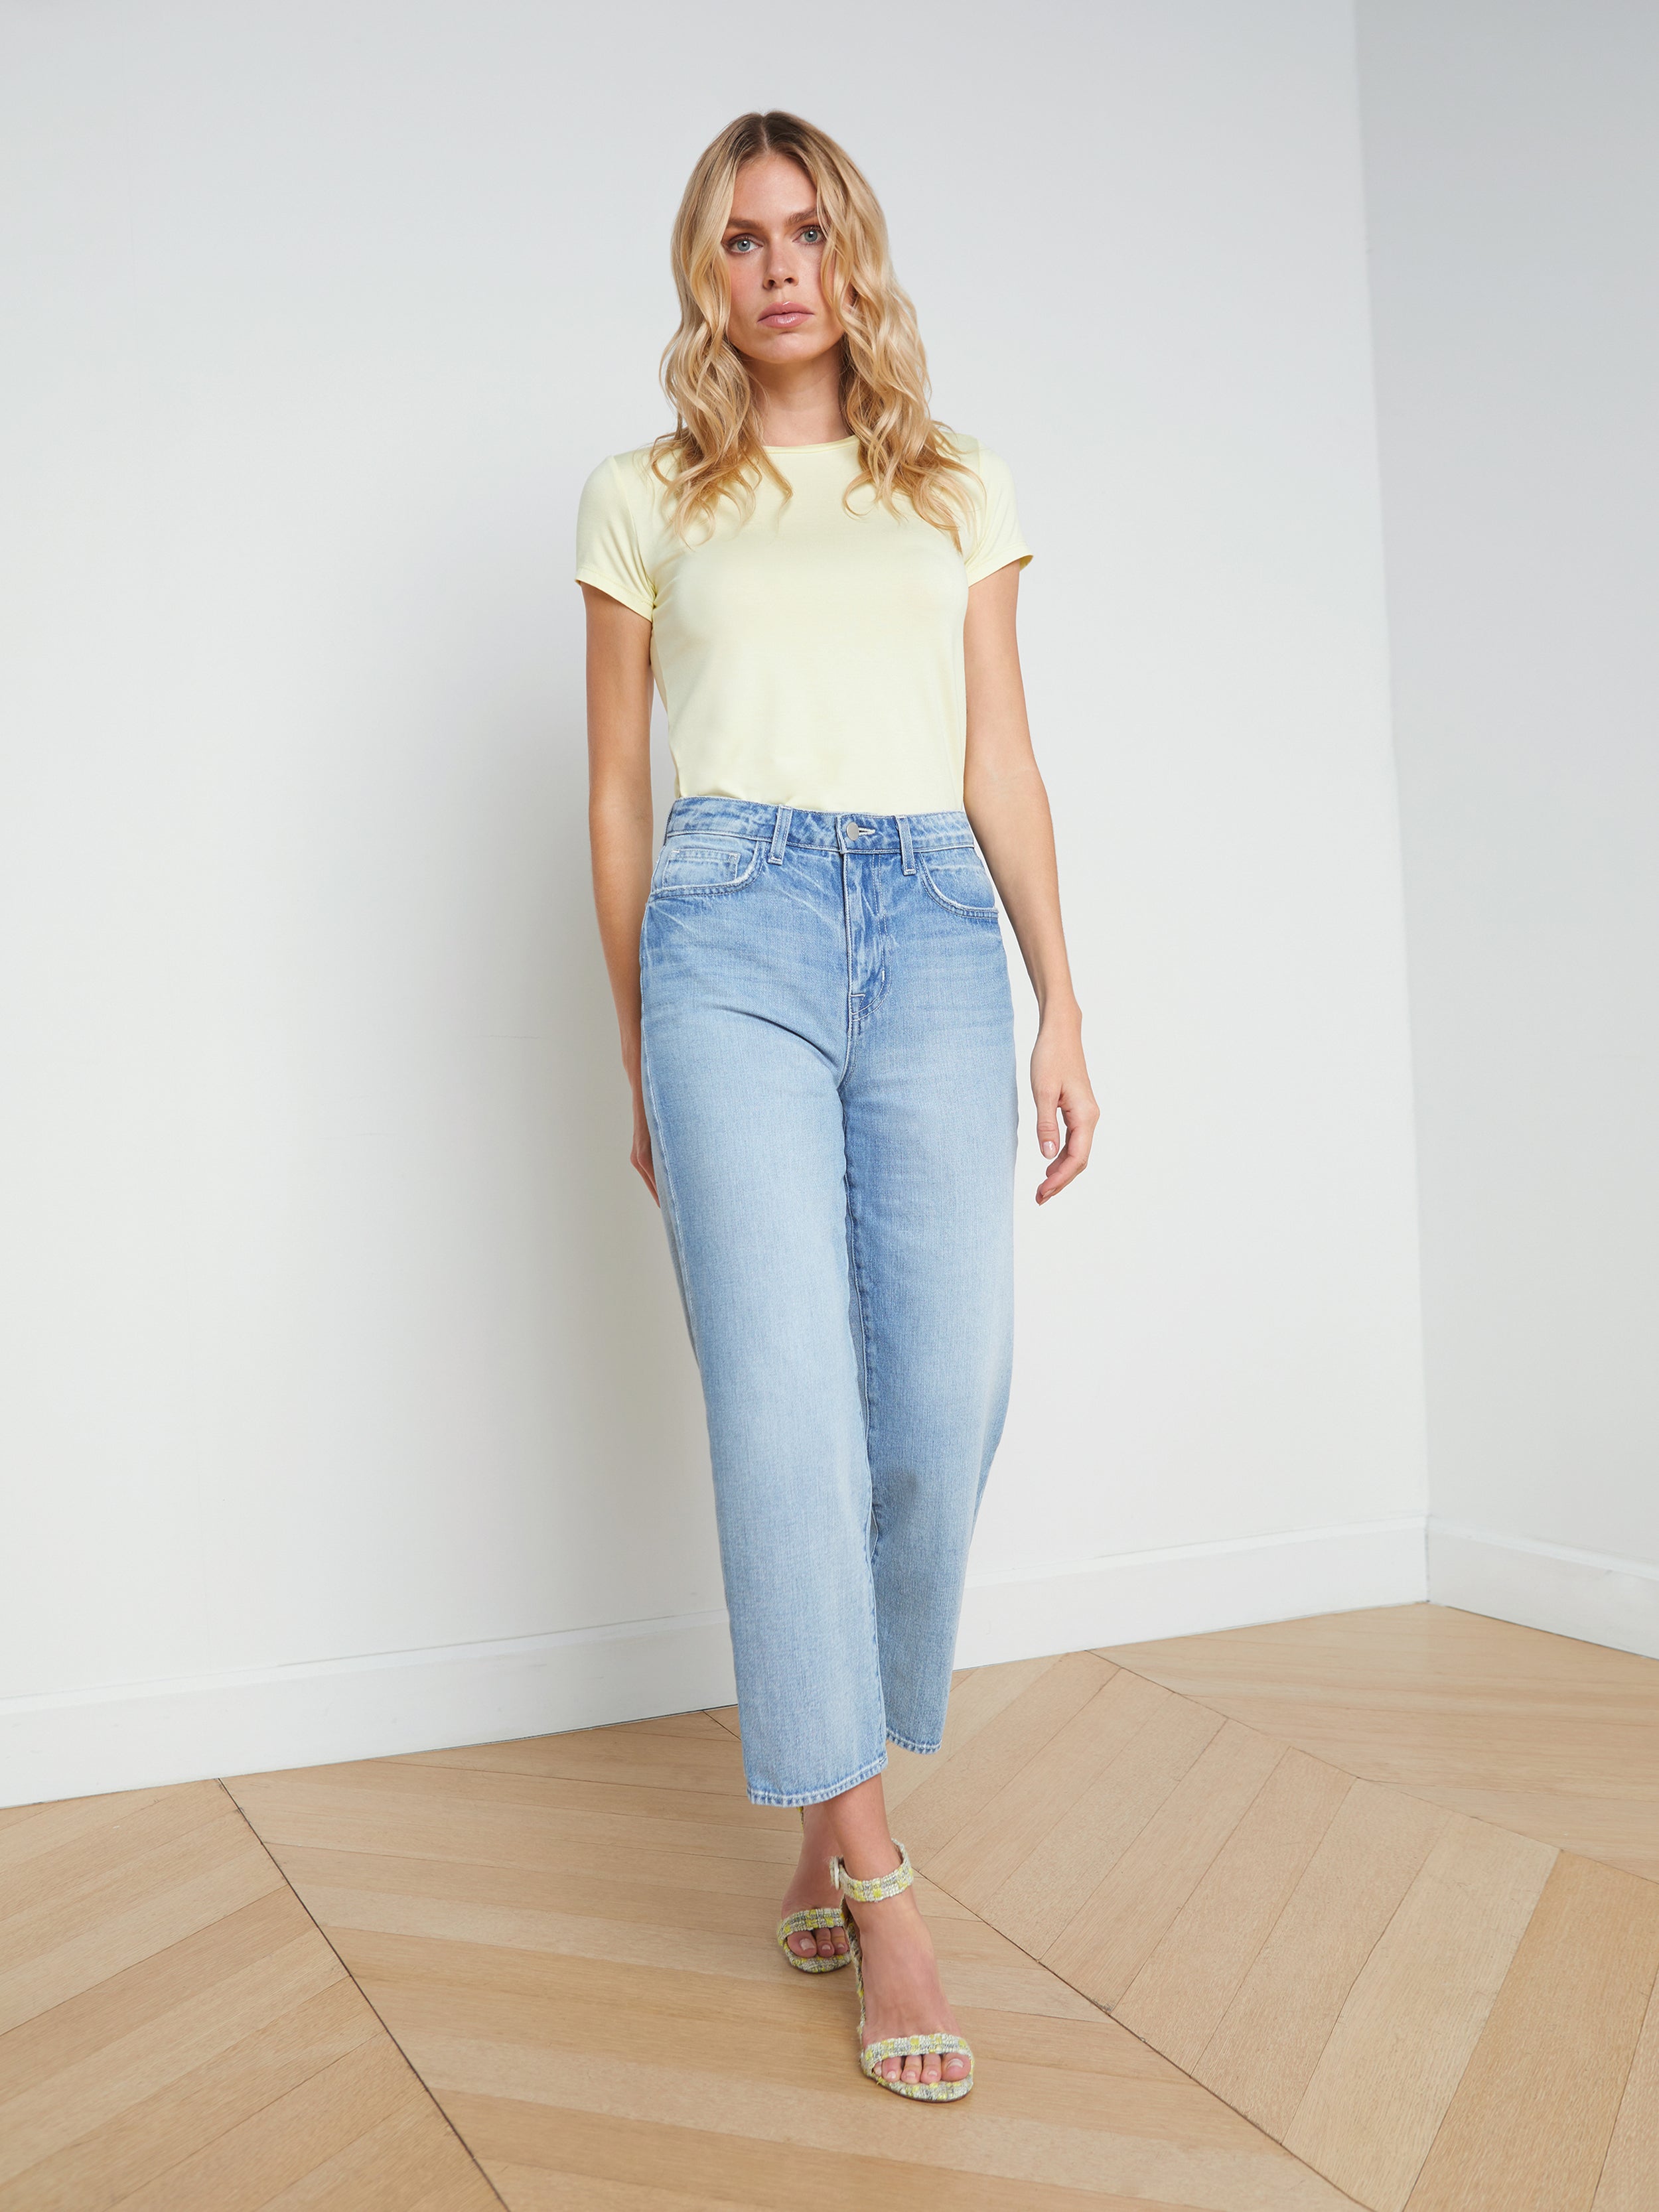 June Cropped Stovepipe Jean in Palisade